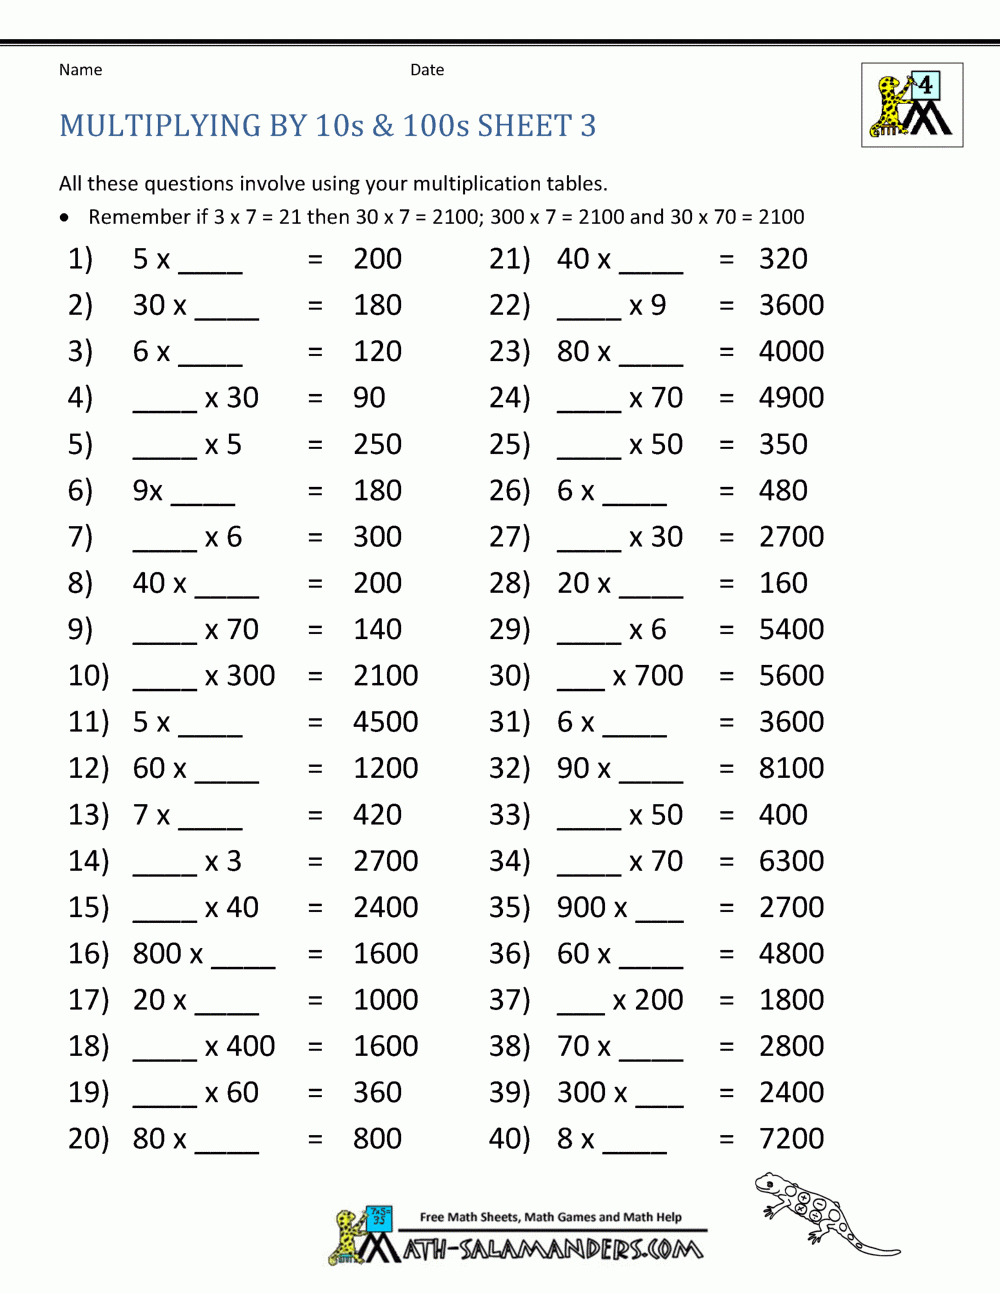 Multiplication Fact Sheets with regard to Multiplication Quiz Printable Pdf